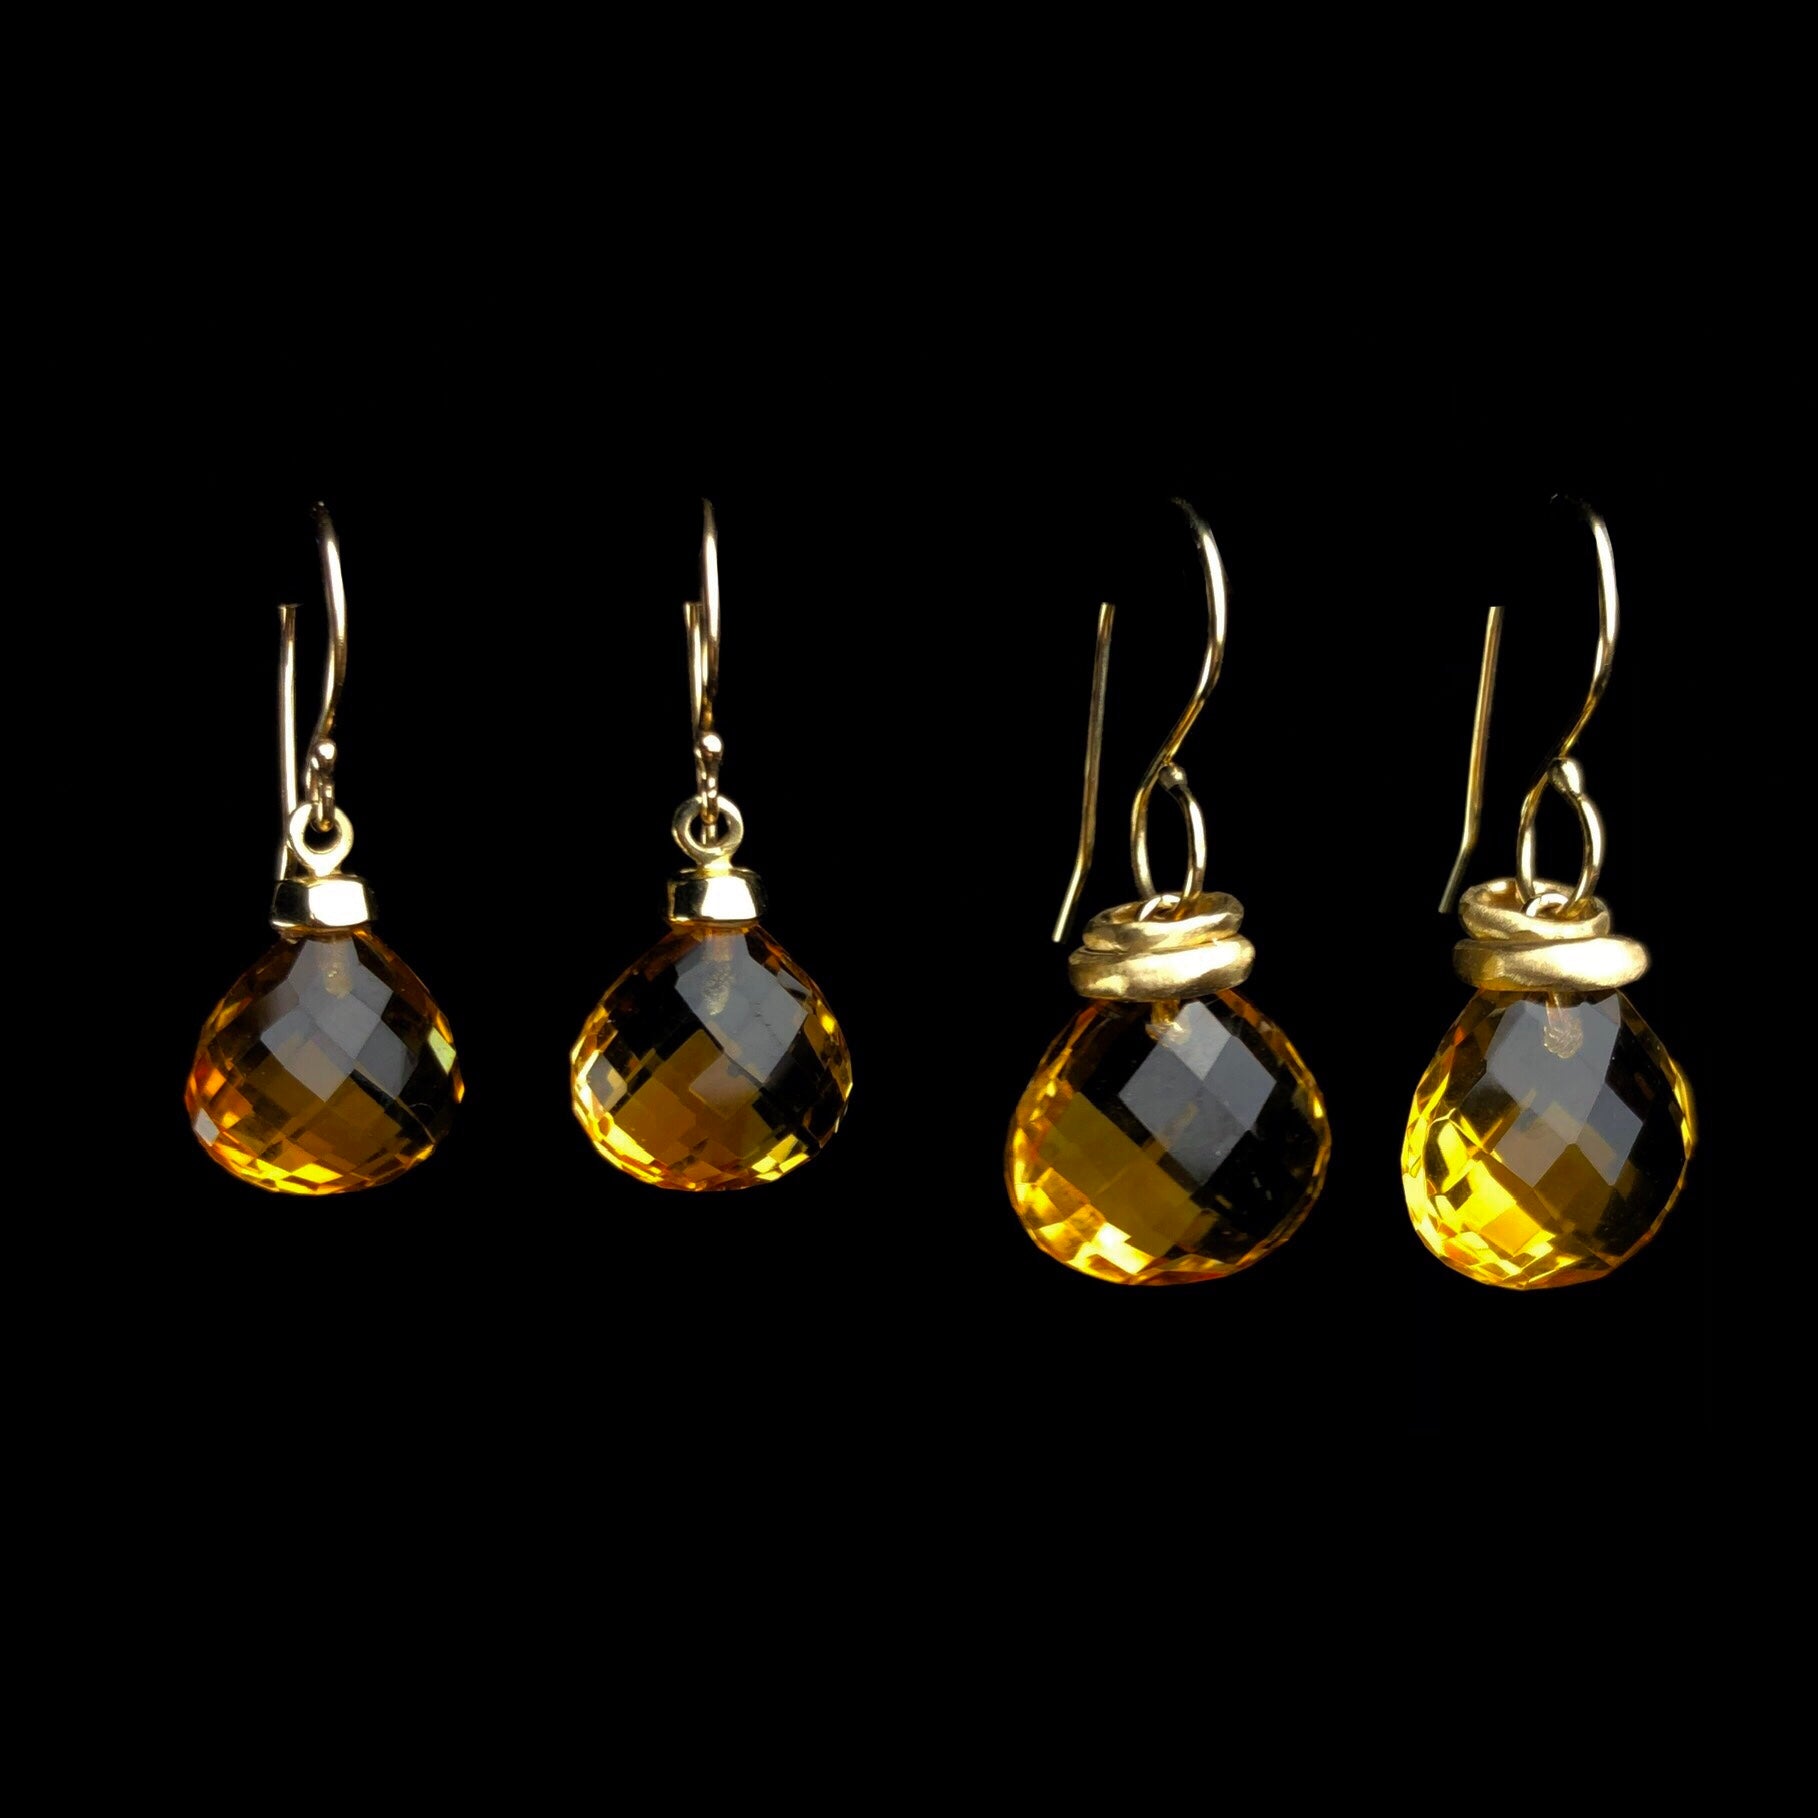 Citrine Drop Earrings shown next to Citrine Droplet Earrings for size